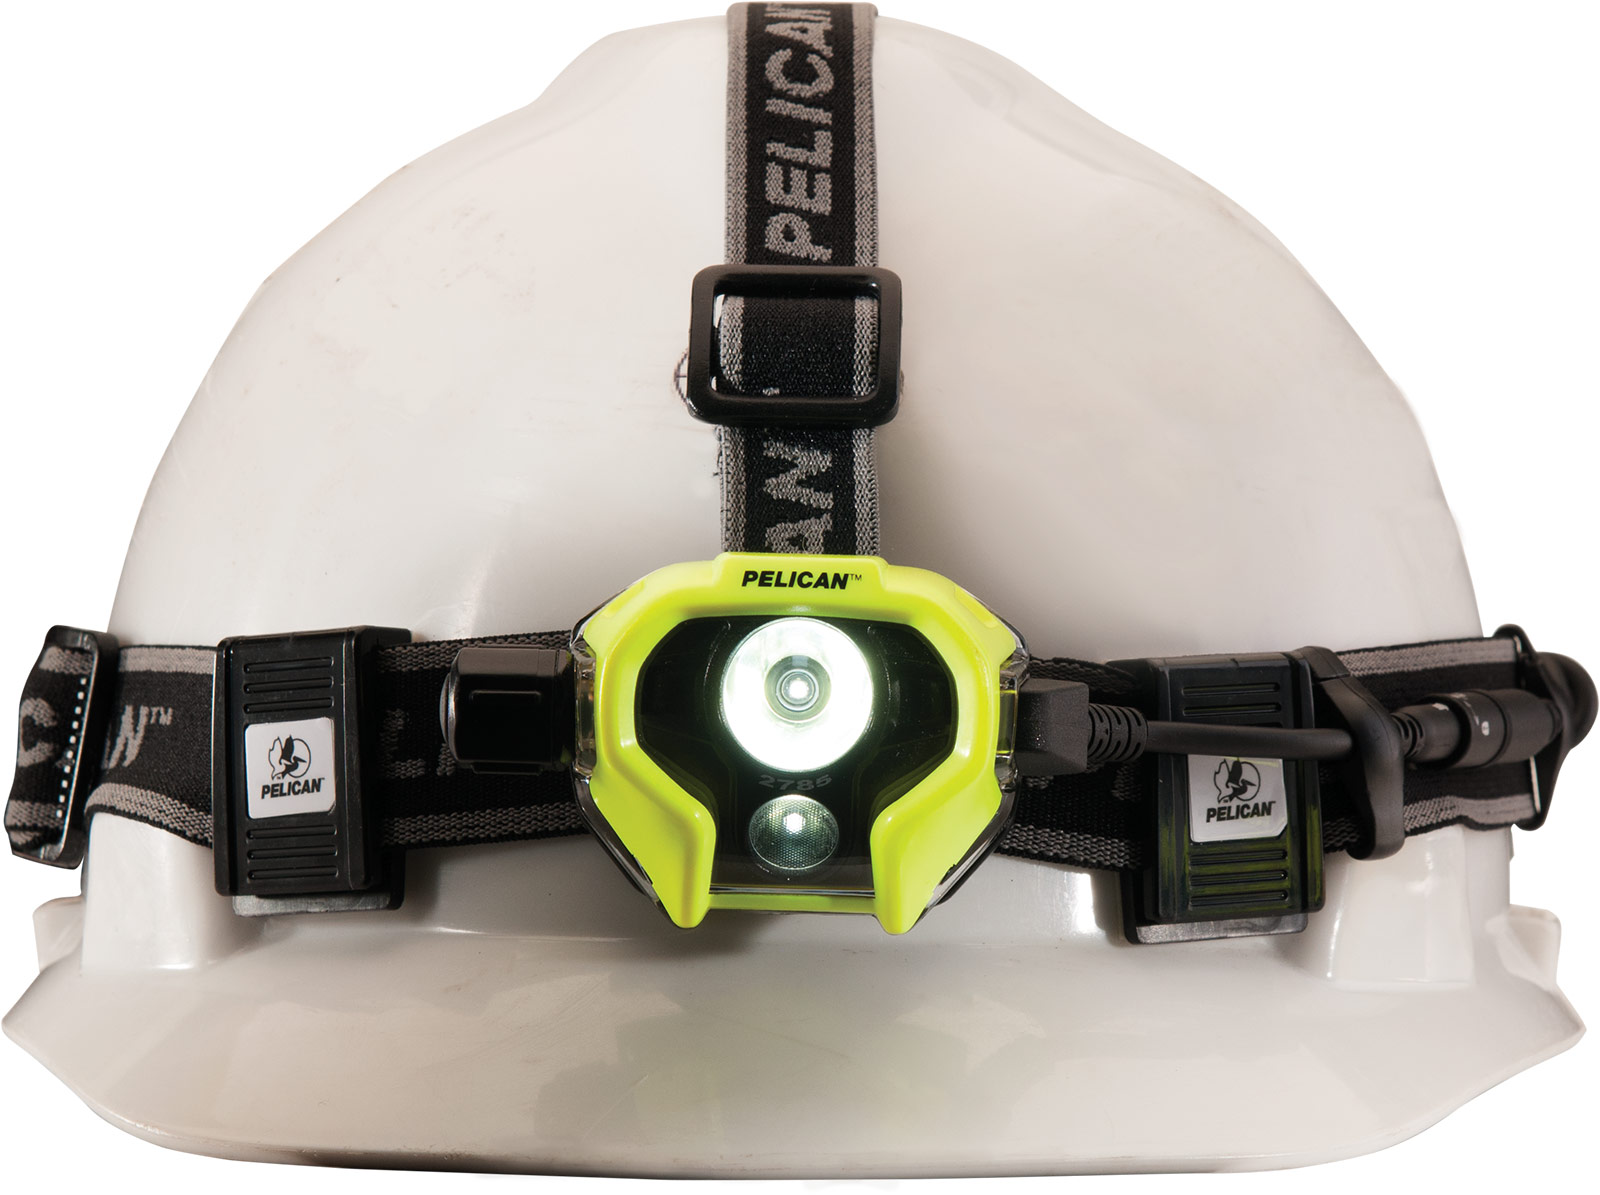 Pelican 2785 LED 215 Lumen Safety Certified Headlamp - 4AA (Certified Class 1 Div 1 / IECEx ia Approved)